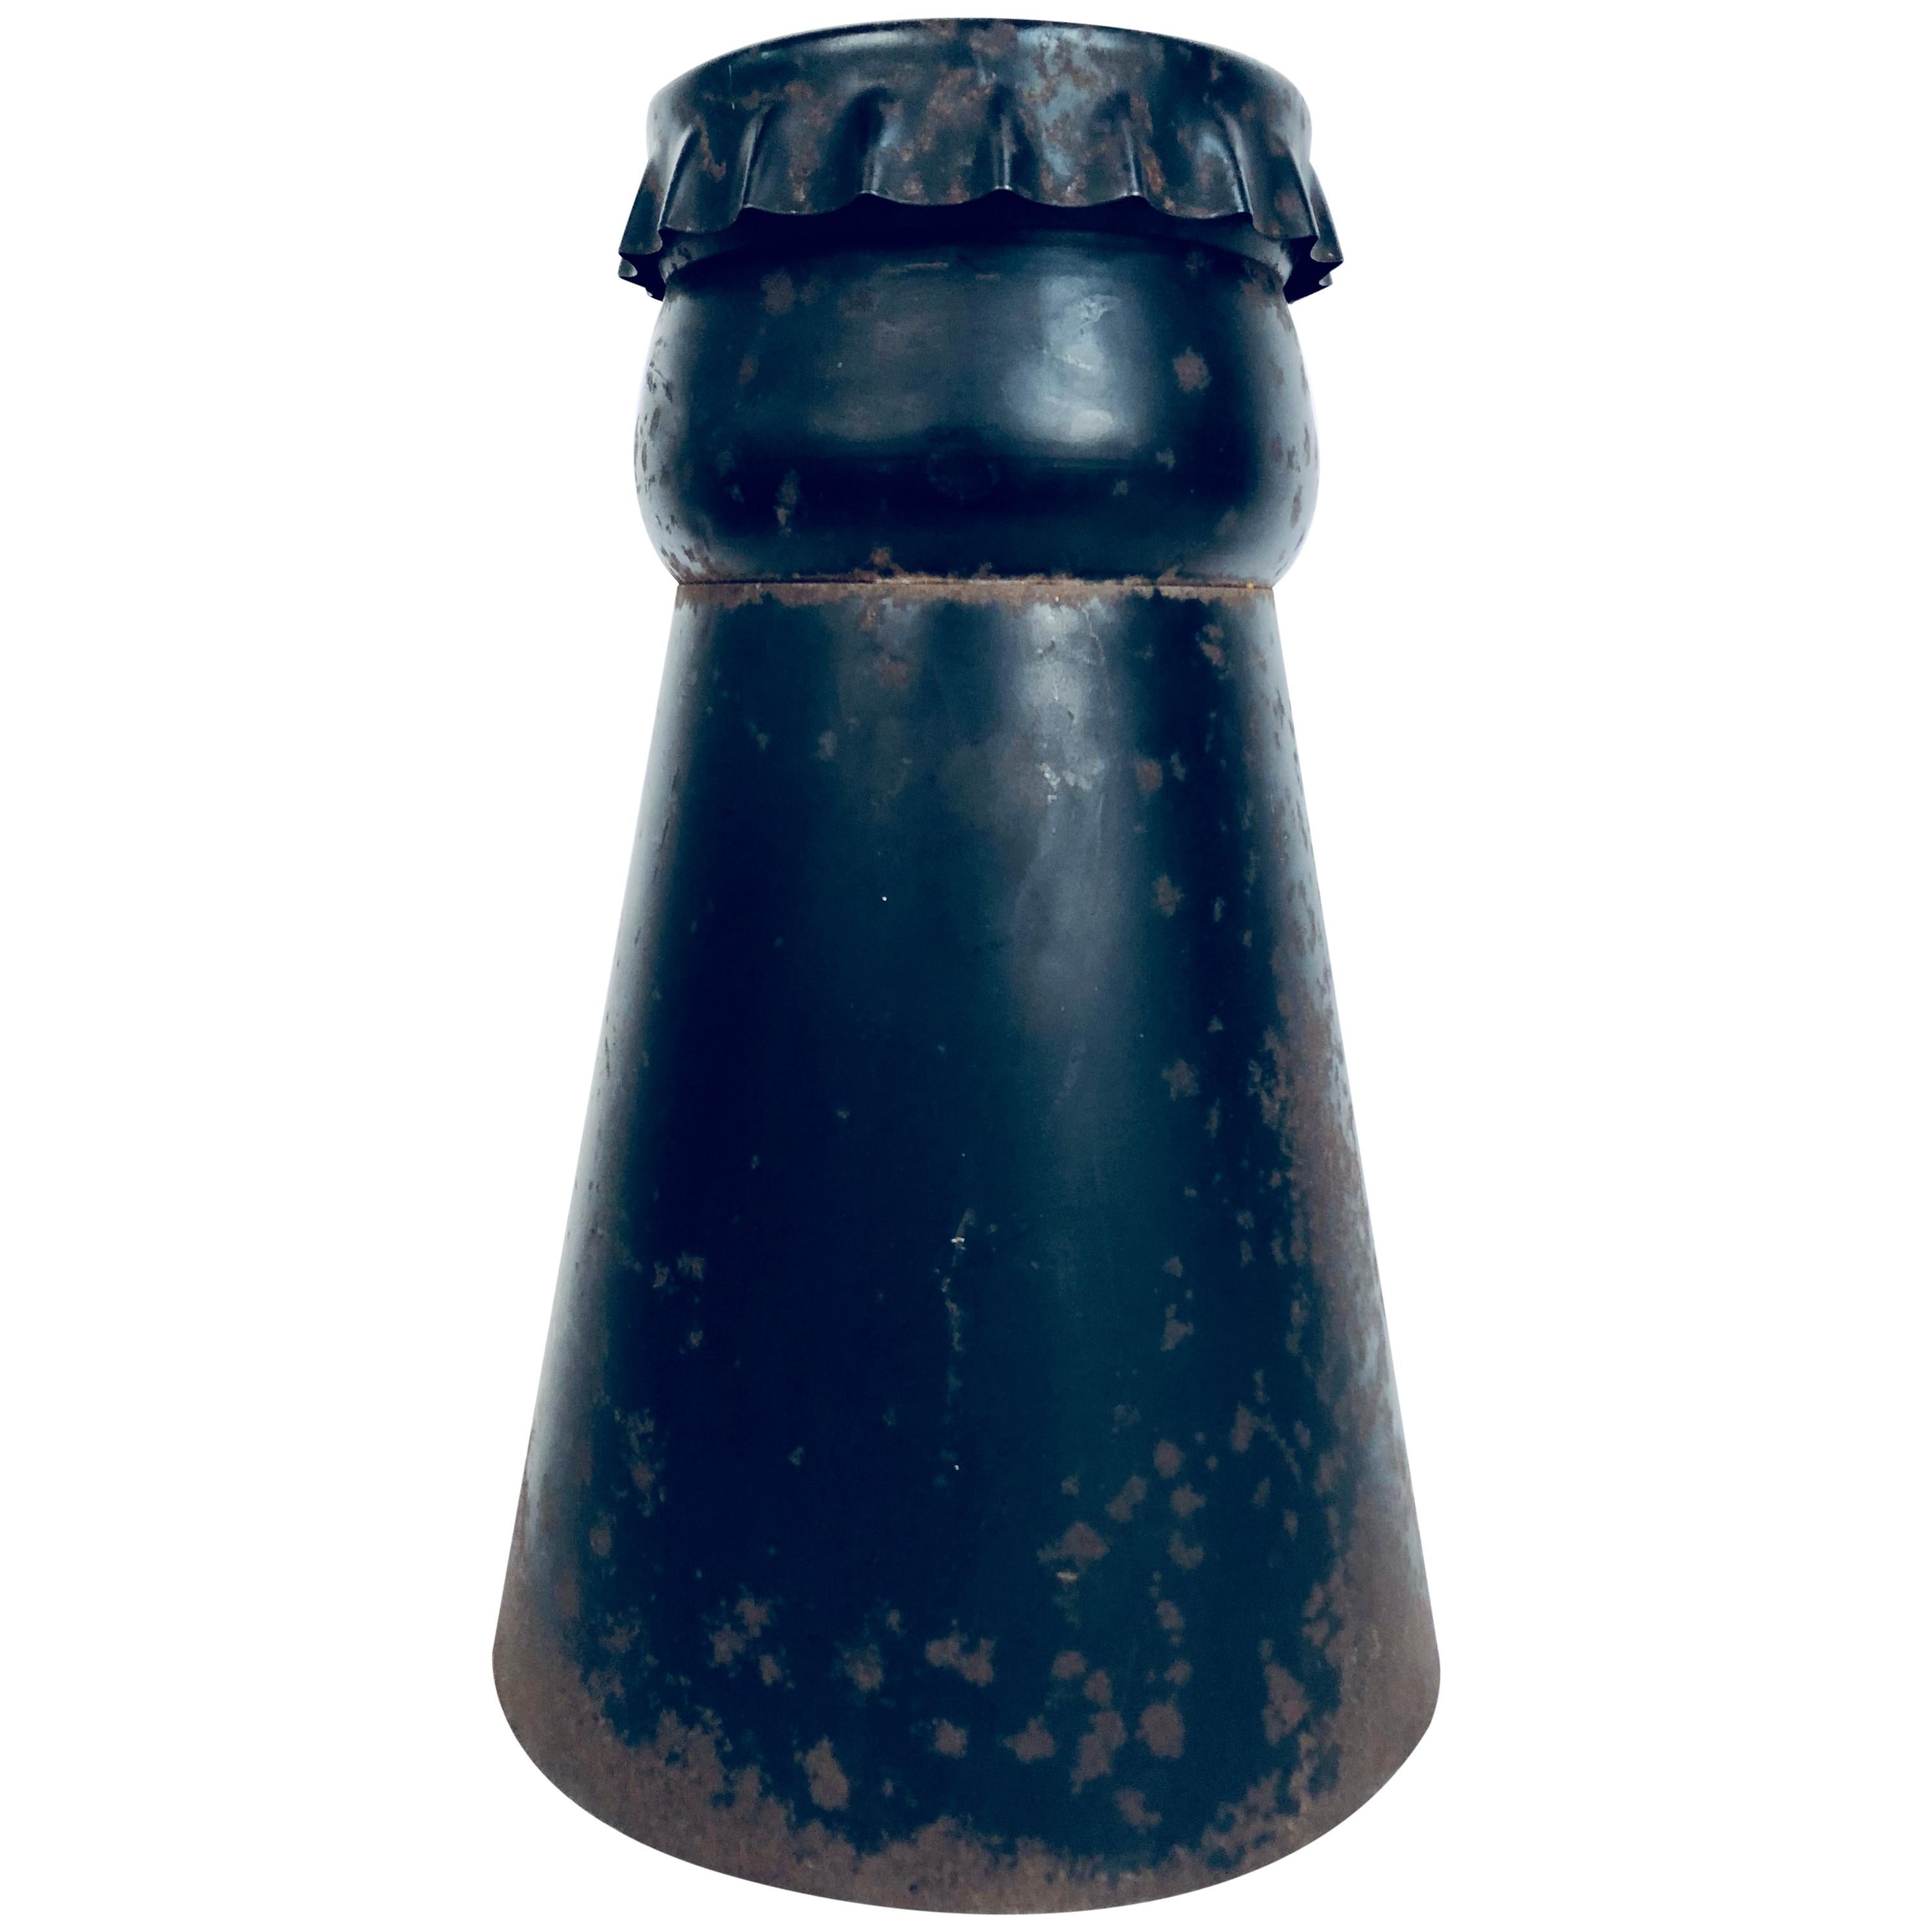 Antique Large Metal Soda Bottle Top Section from Advertising Piece, circa 1940